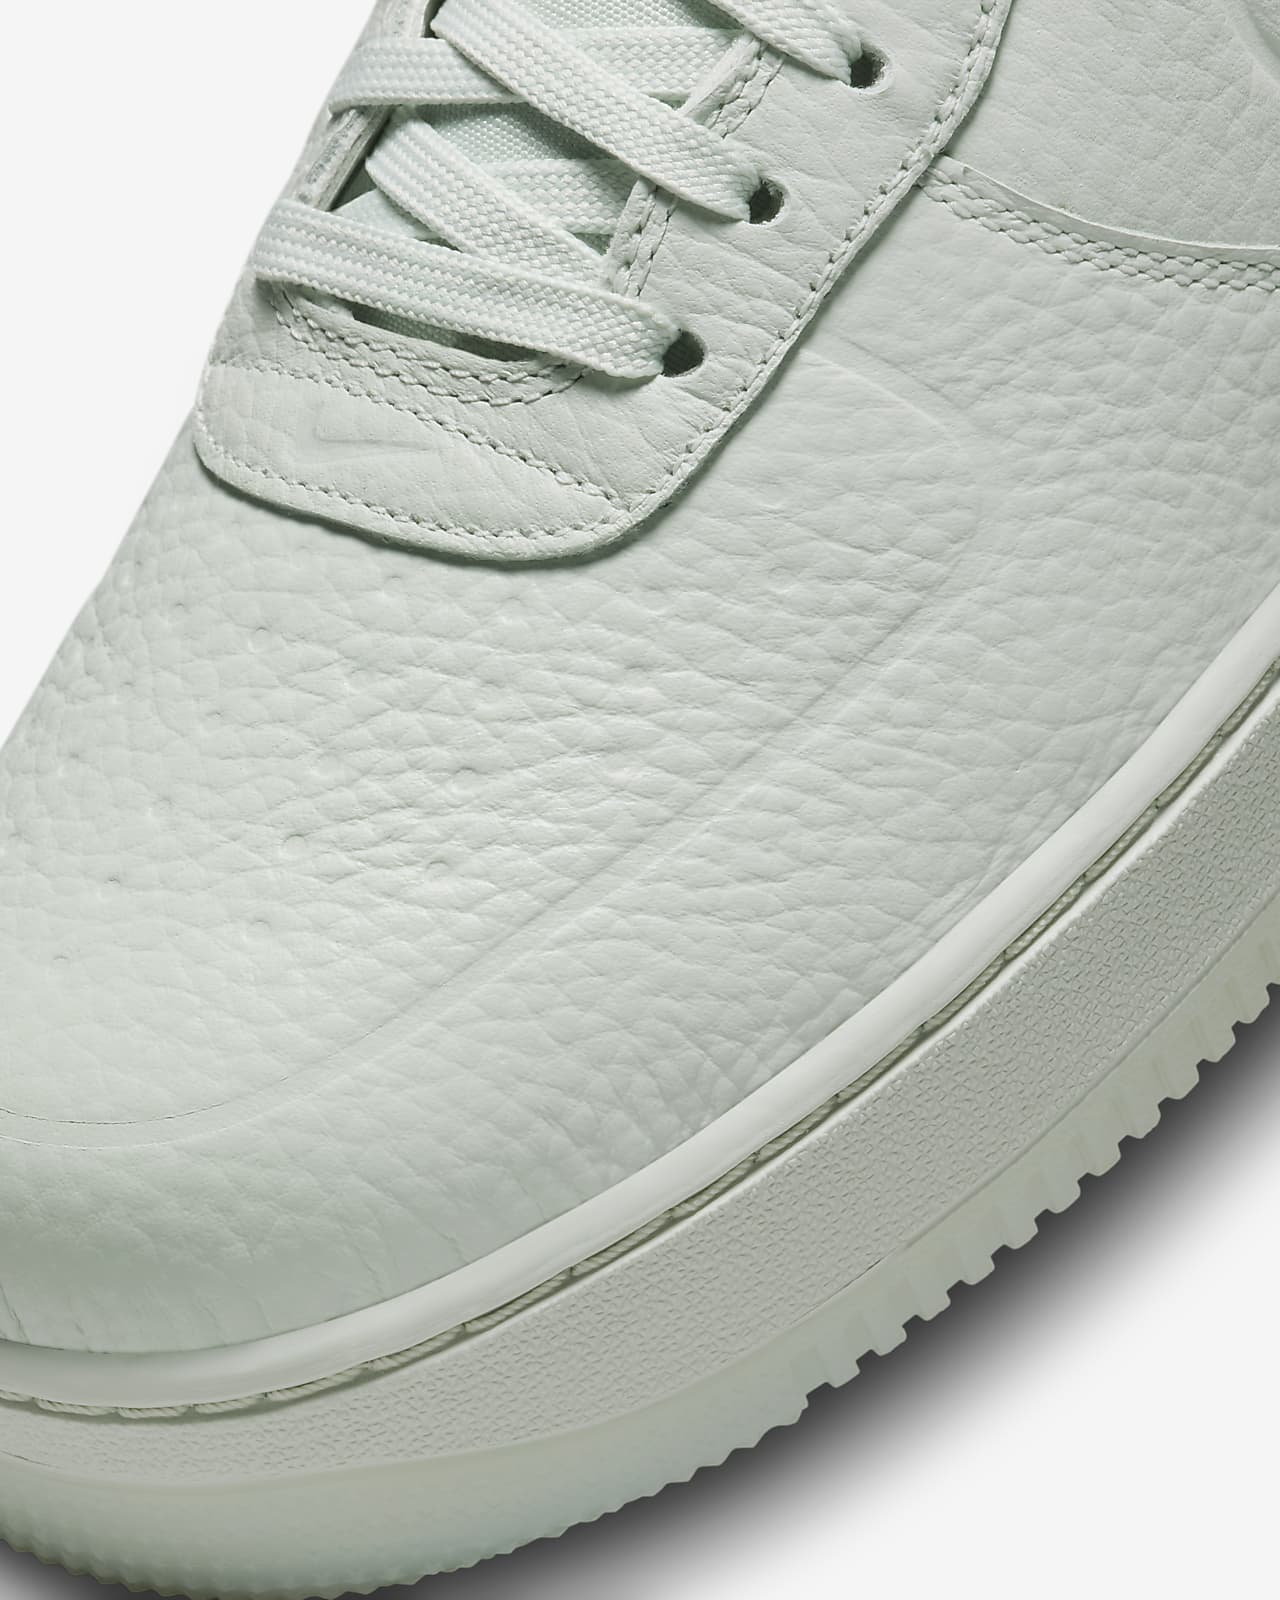 The Air Force 1 Gets Technical